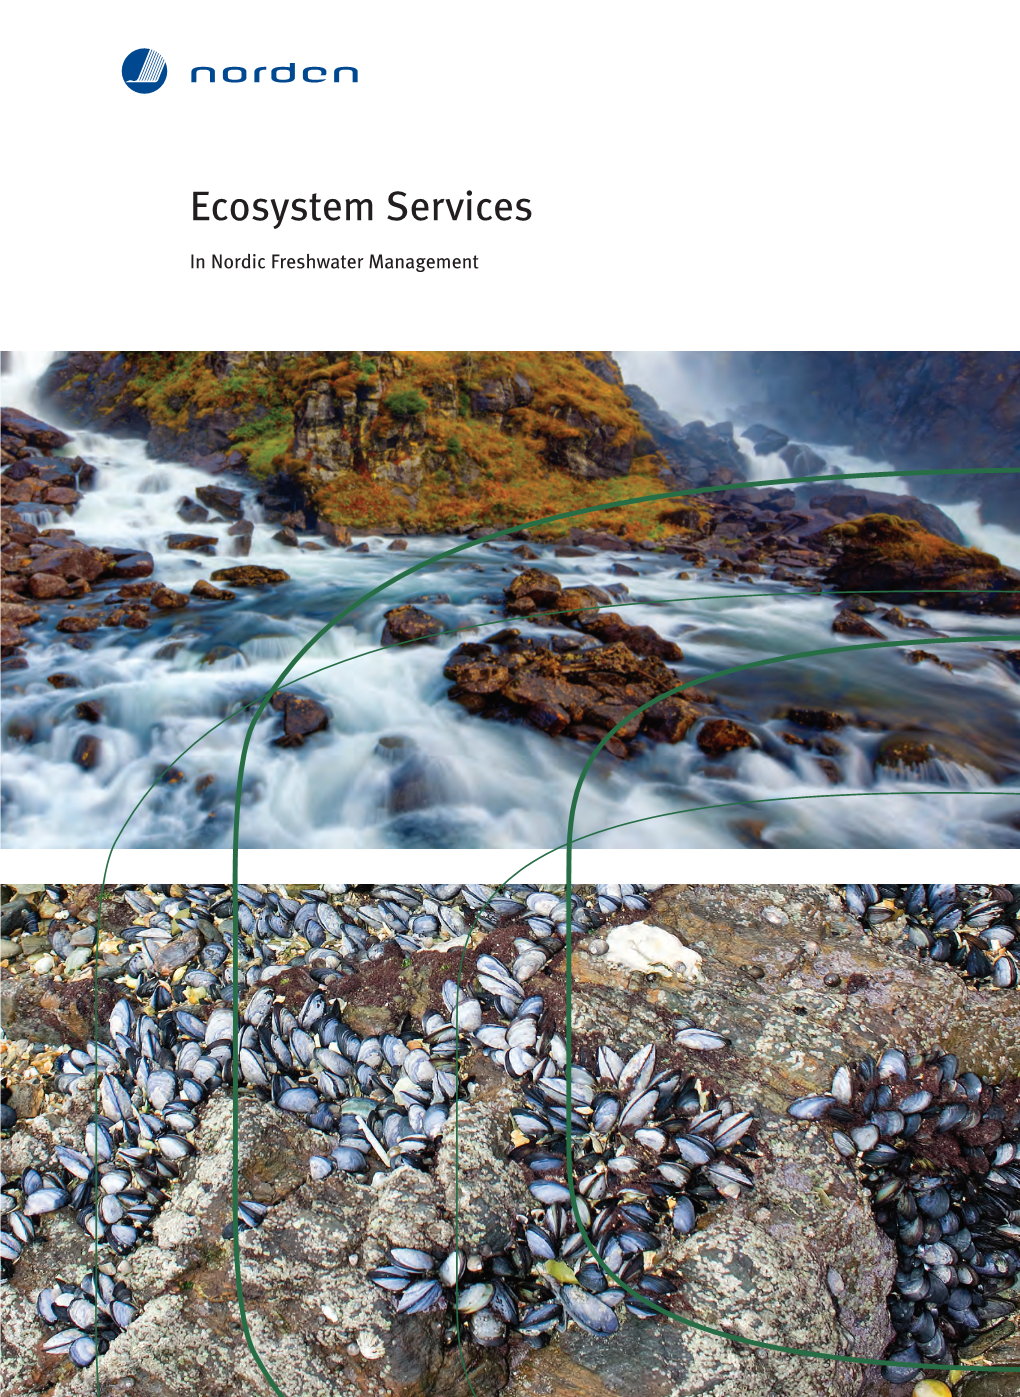 Ecosystem Services – in Nordic Freshwater Management